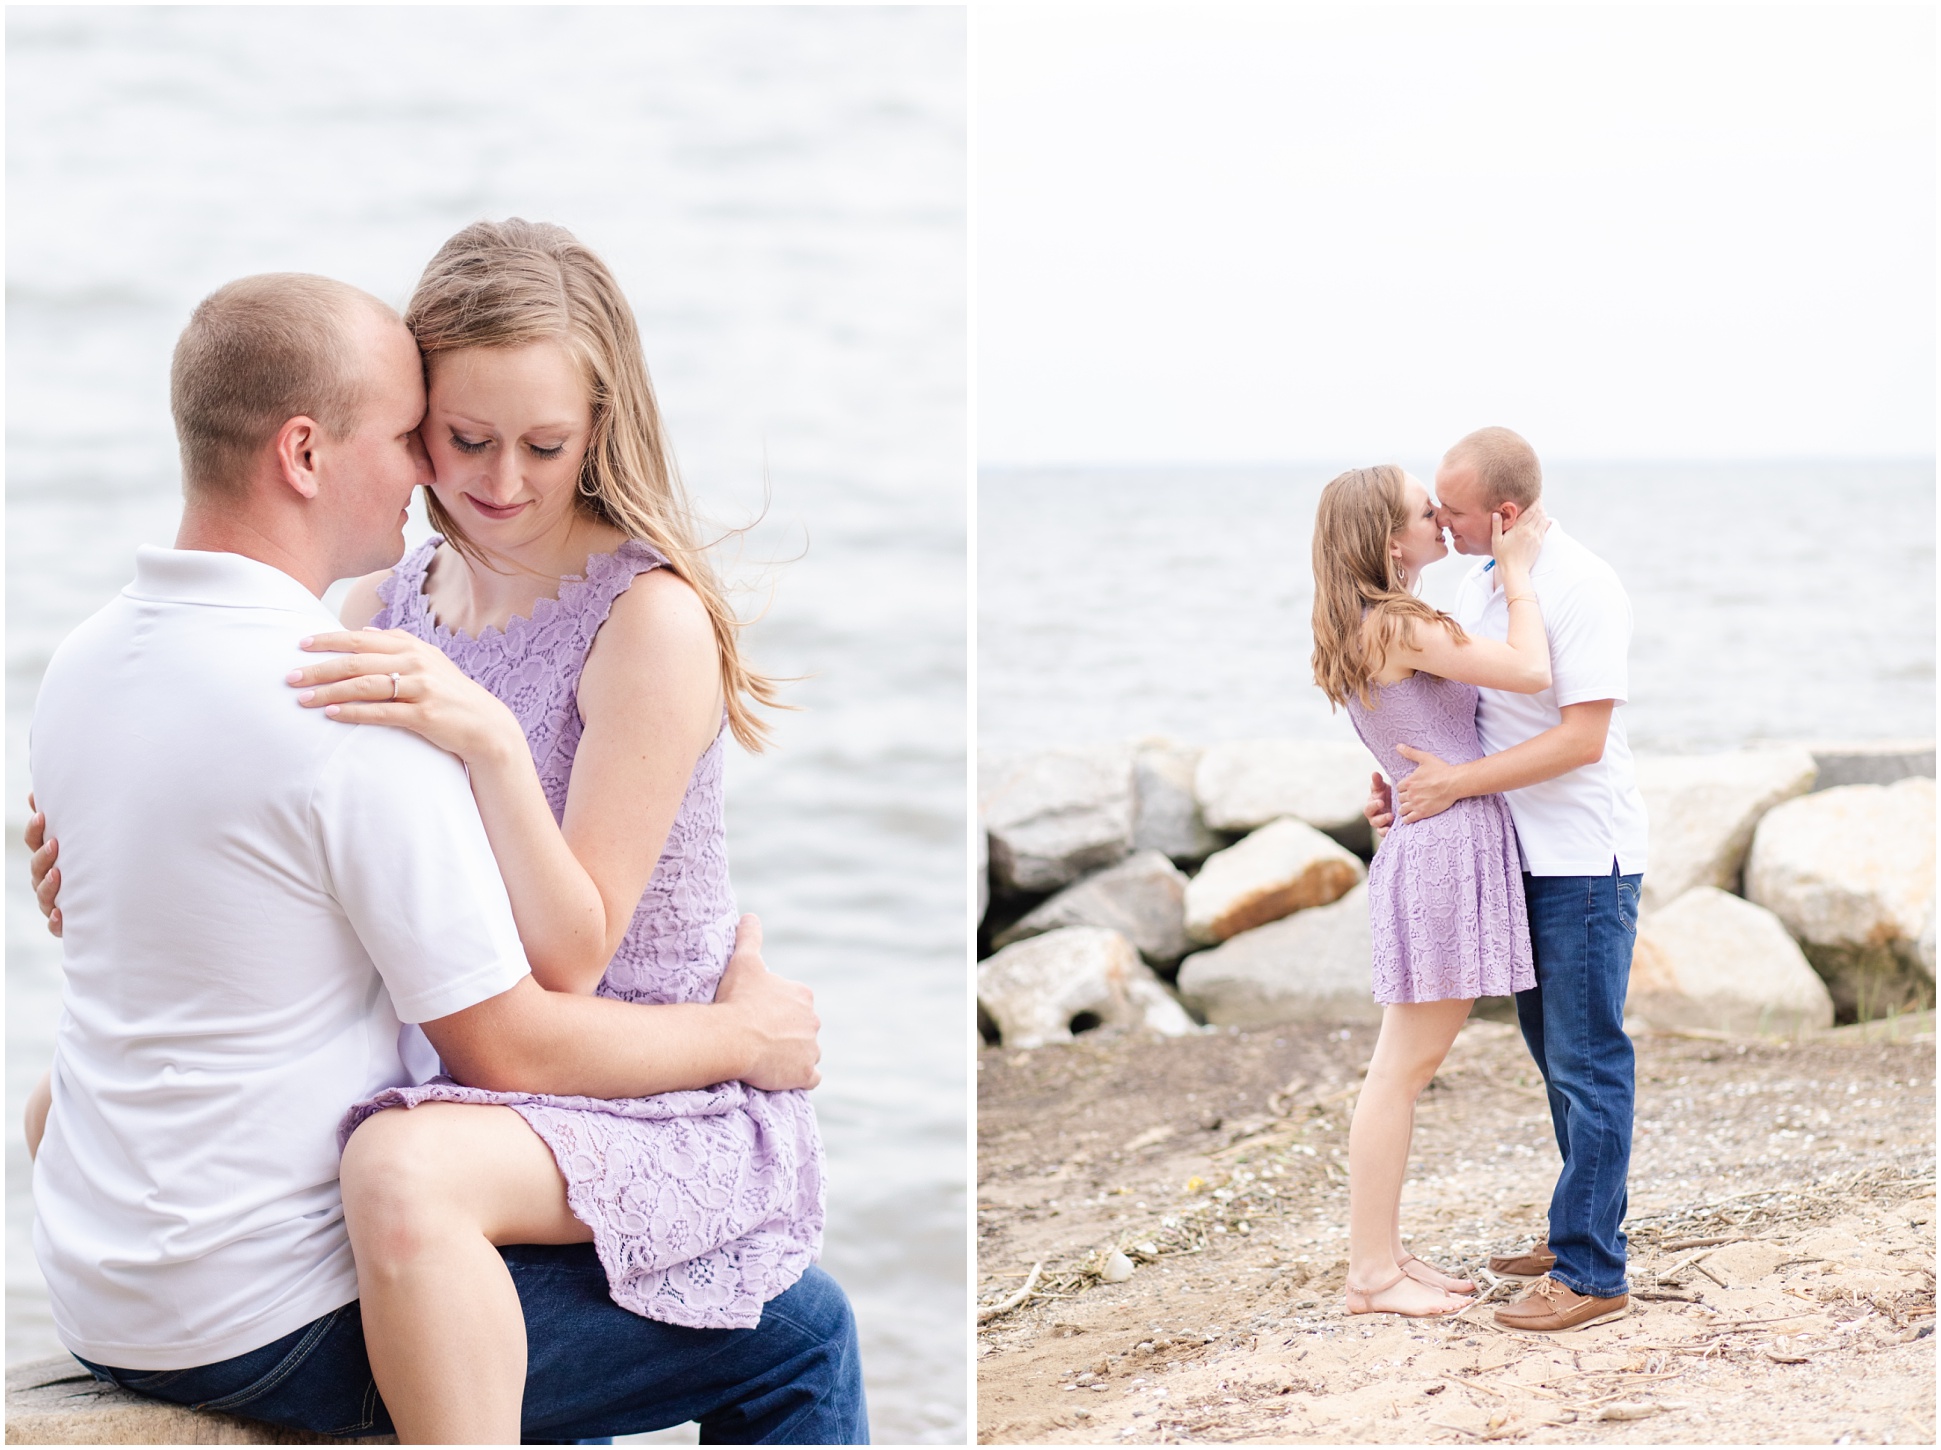 Bride and Groom Snuggling on the shore of north point park in Maryland. Bride wearing lavender dress, groom wearing blue jeans and white polo shirt